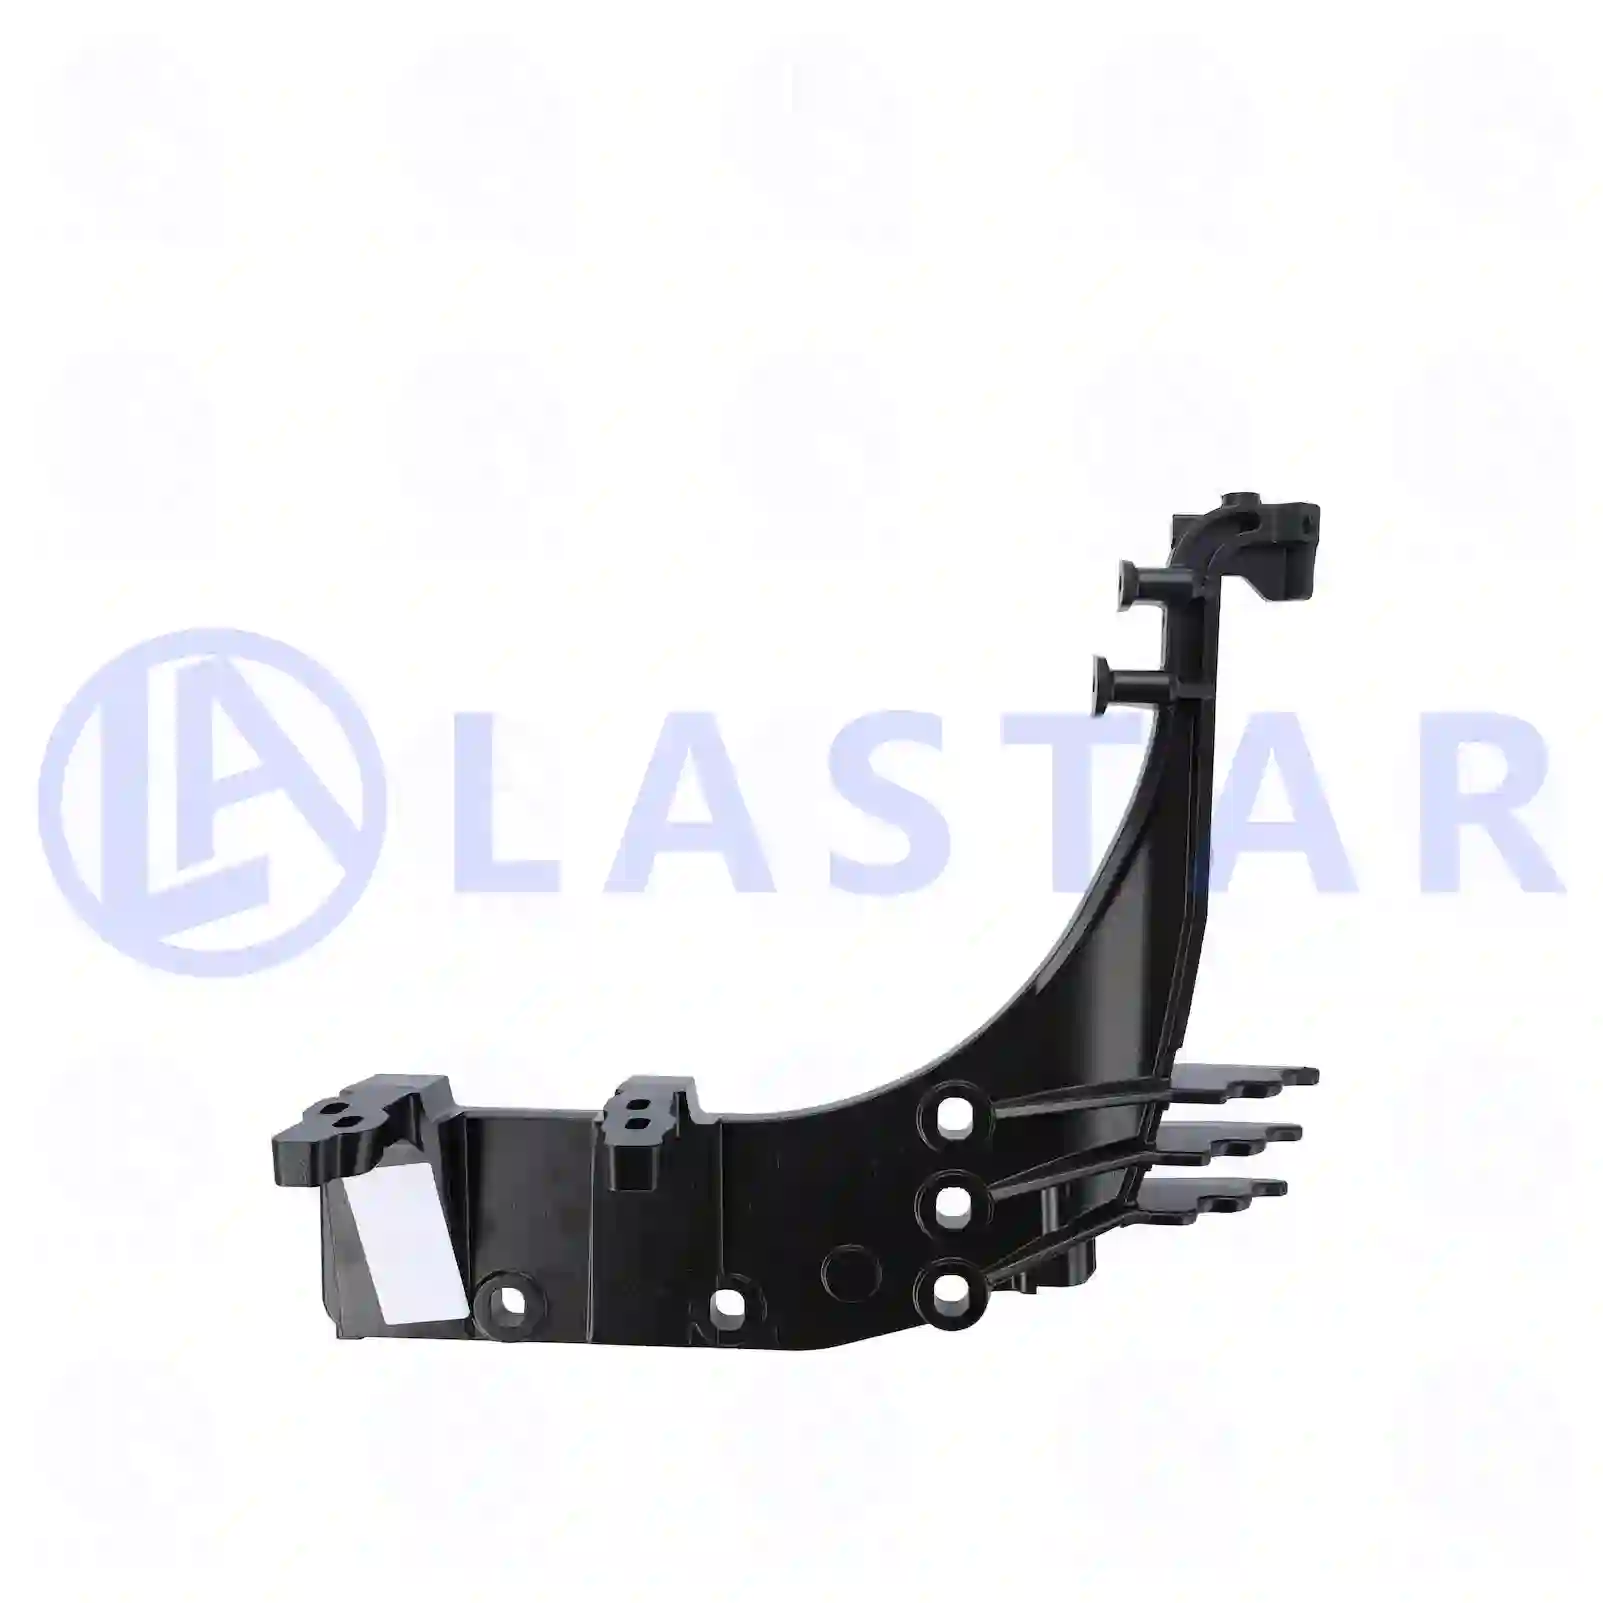 Support, boarding step, right, 77719792, 1798460, 1948152 ||  77719792 Lastar Spare Part | Truck Spare Parts, Auotomotive Spare Parts Support, boarding step, right, 77719792, 1798460, 1948152 ||  77719792 Lastar Spare Part | Truck Spare Parts, Auotomotive Spare Parts